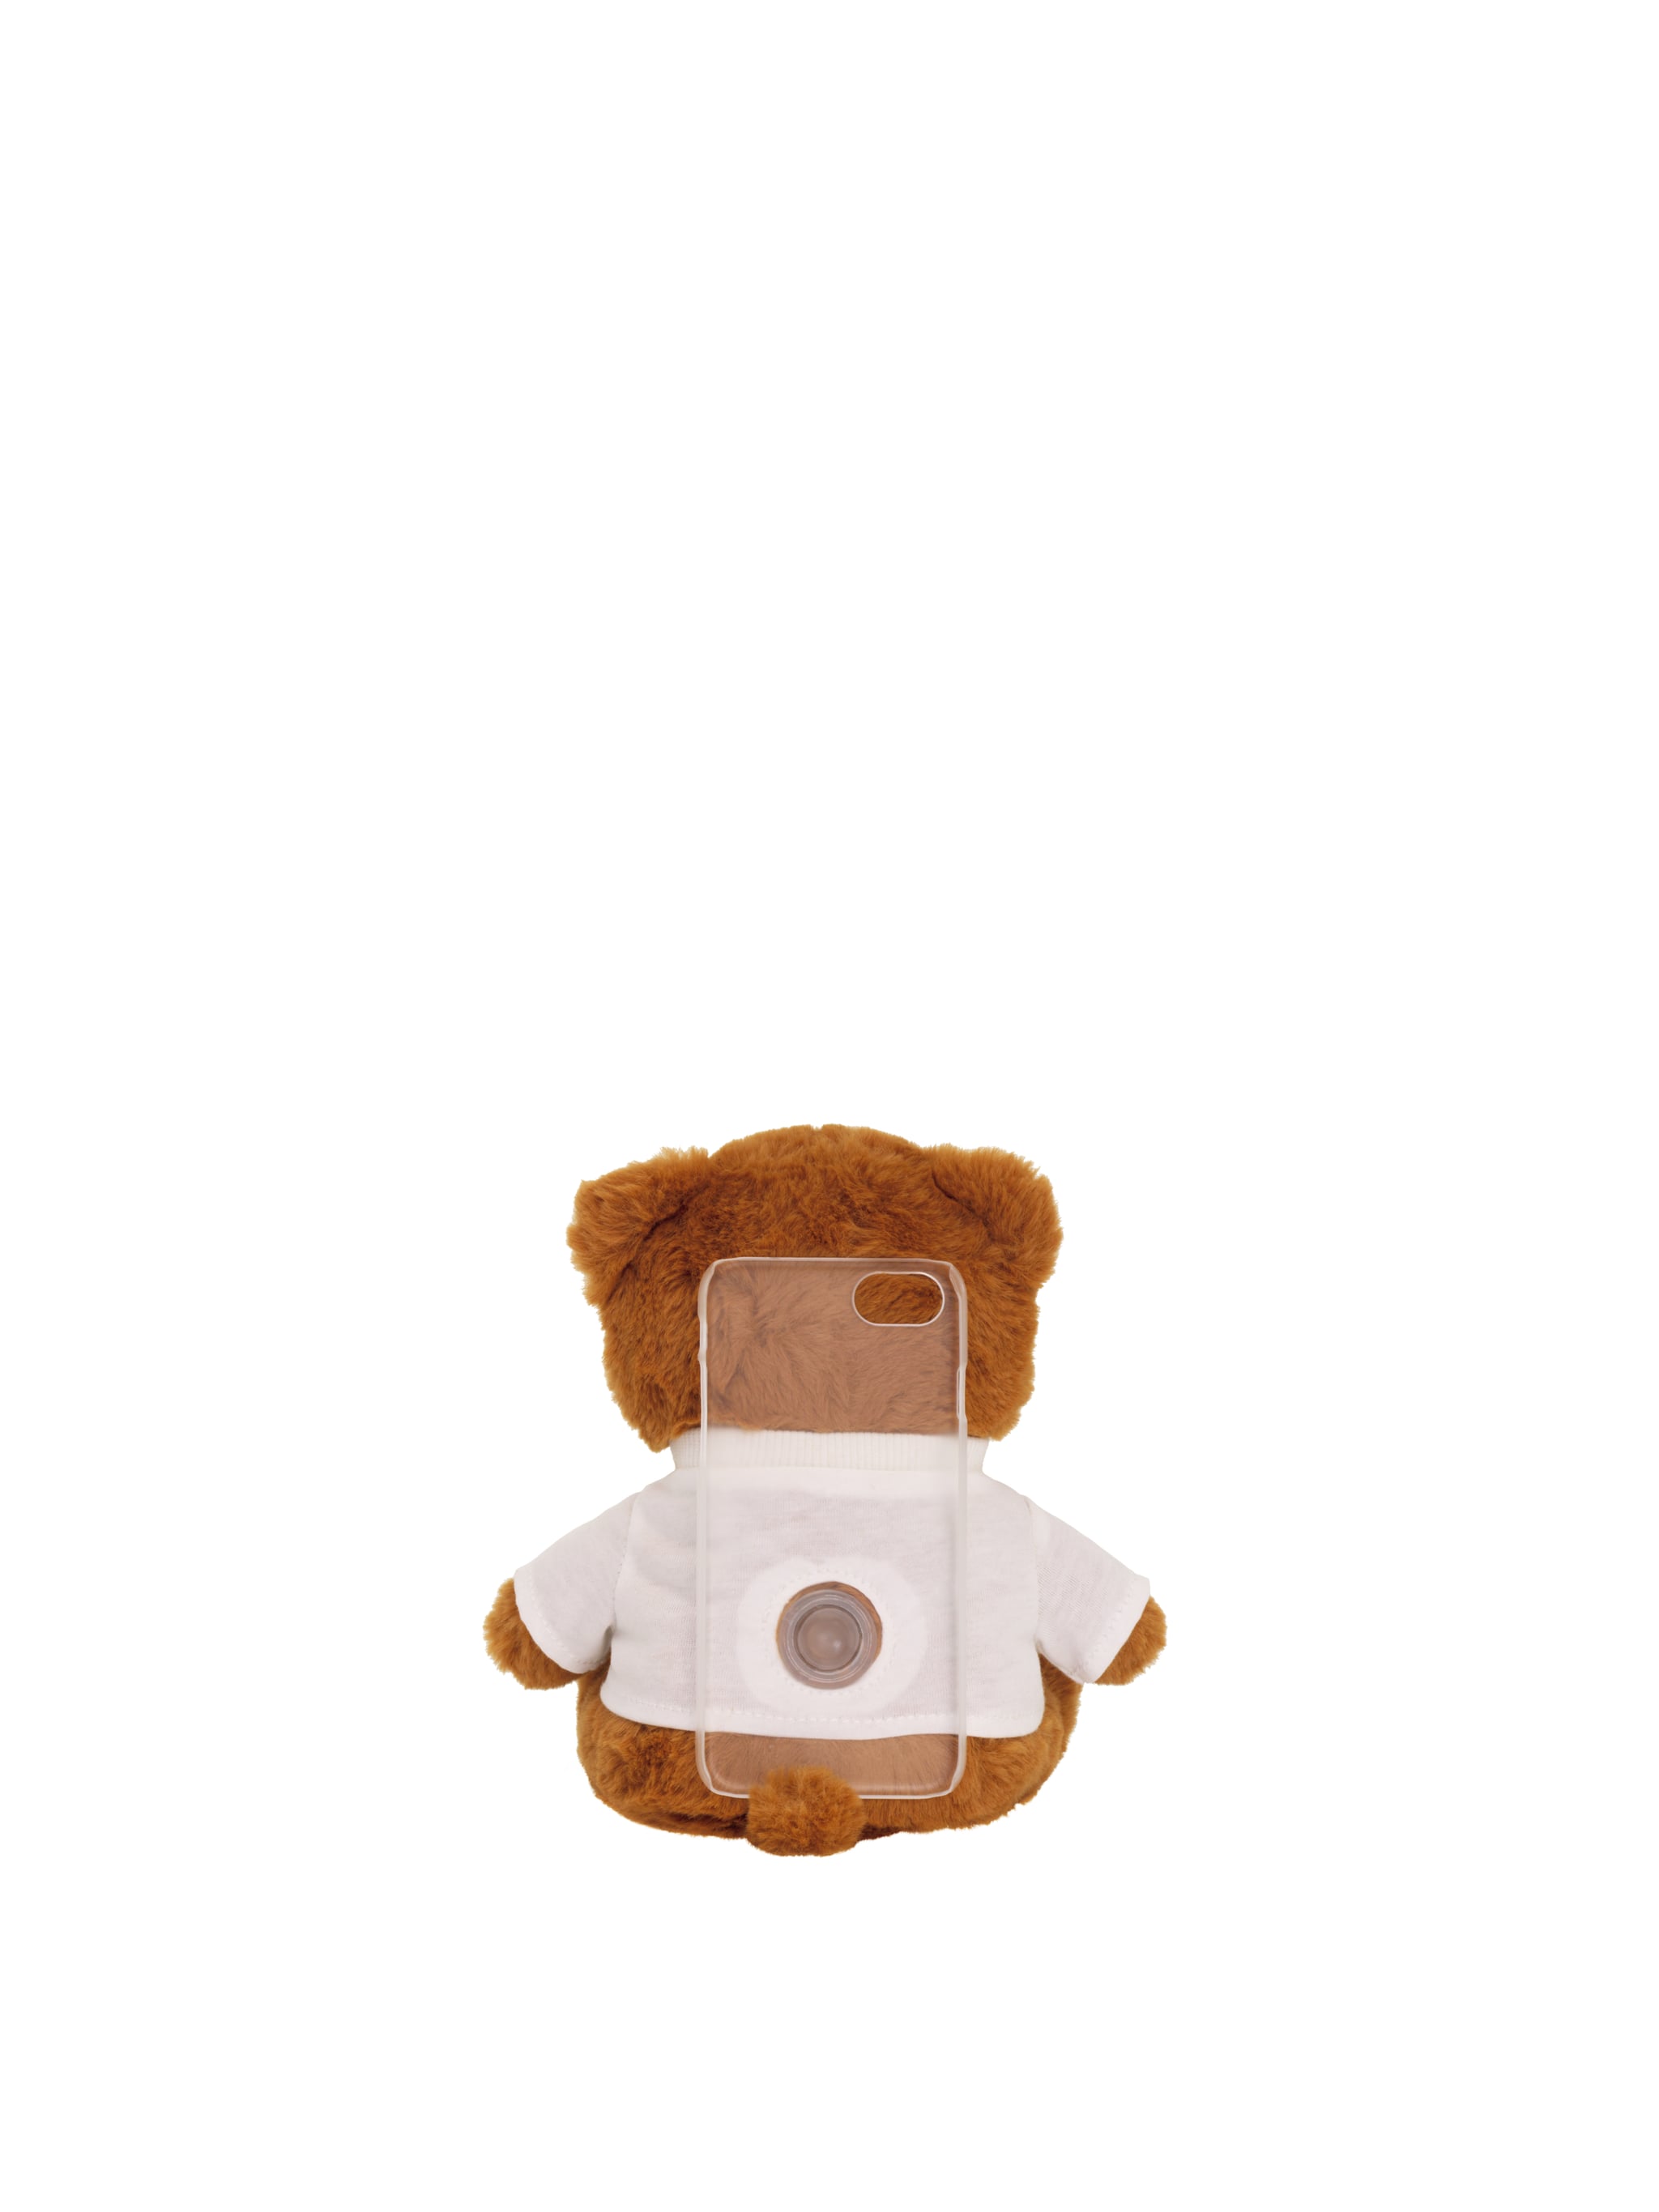 Teddy Bear Iphone Case It S Going Down See And Shop Every Single Piece From The H M X Moschino Collection Popsugar Fashion Photo 132